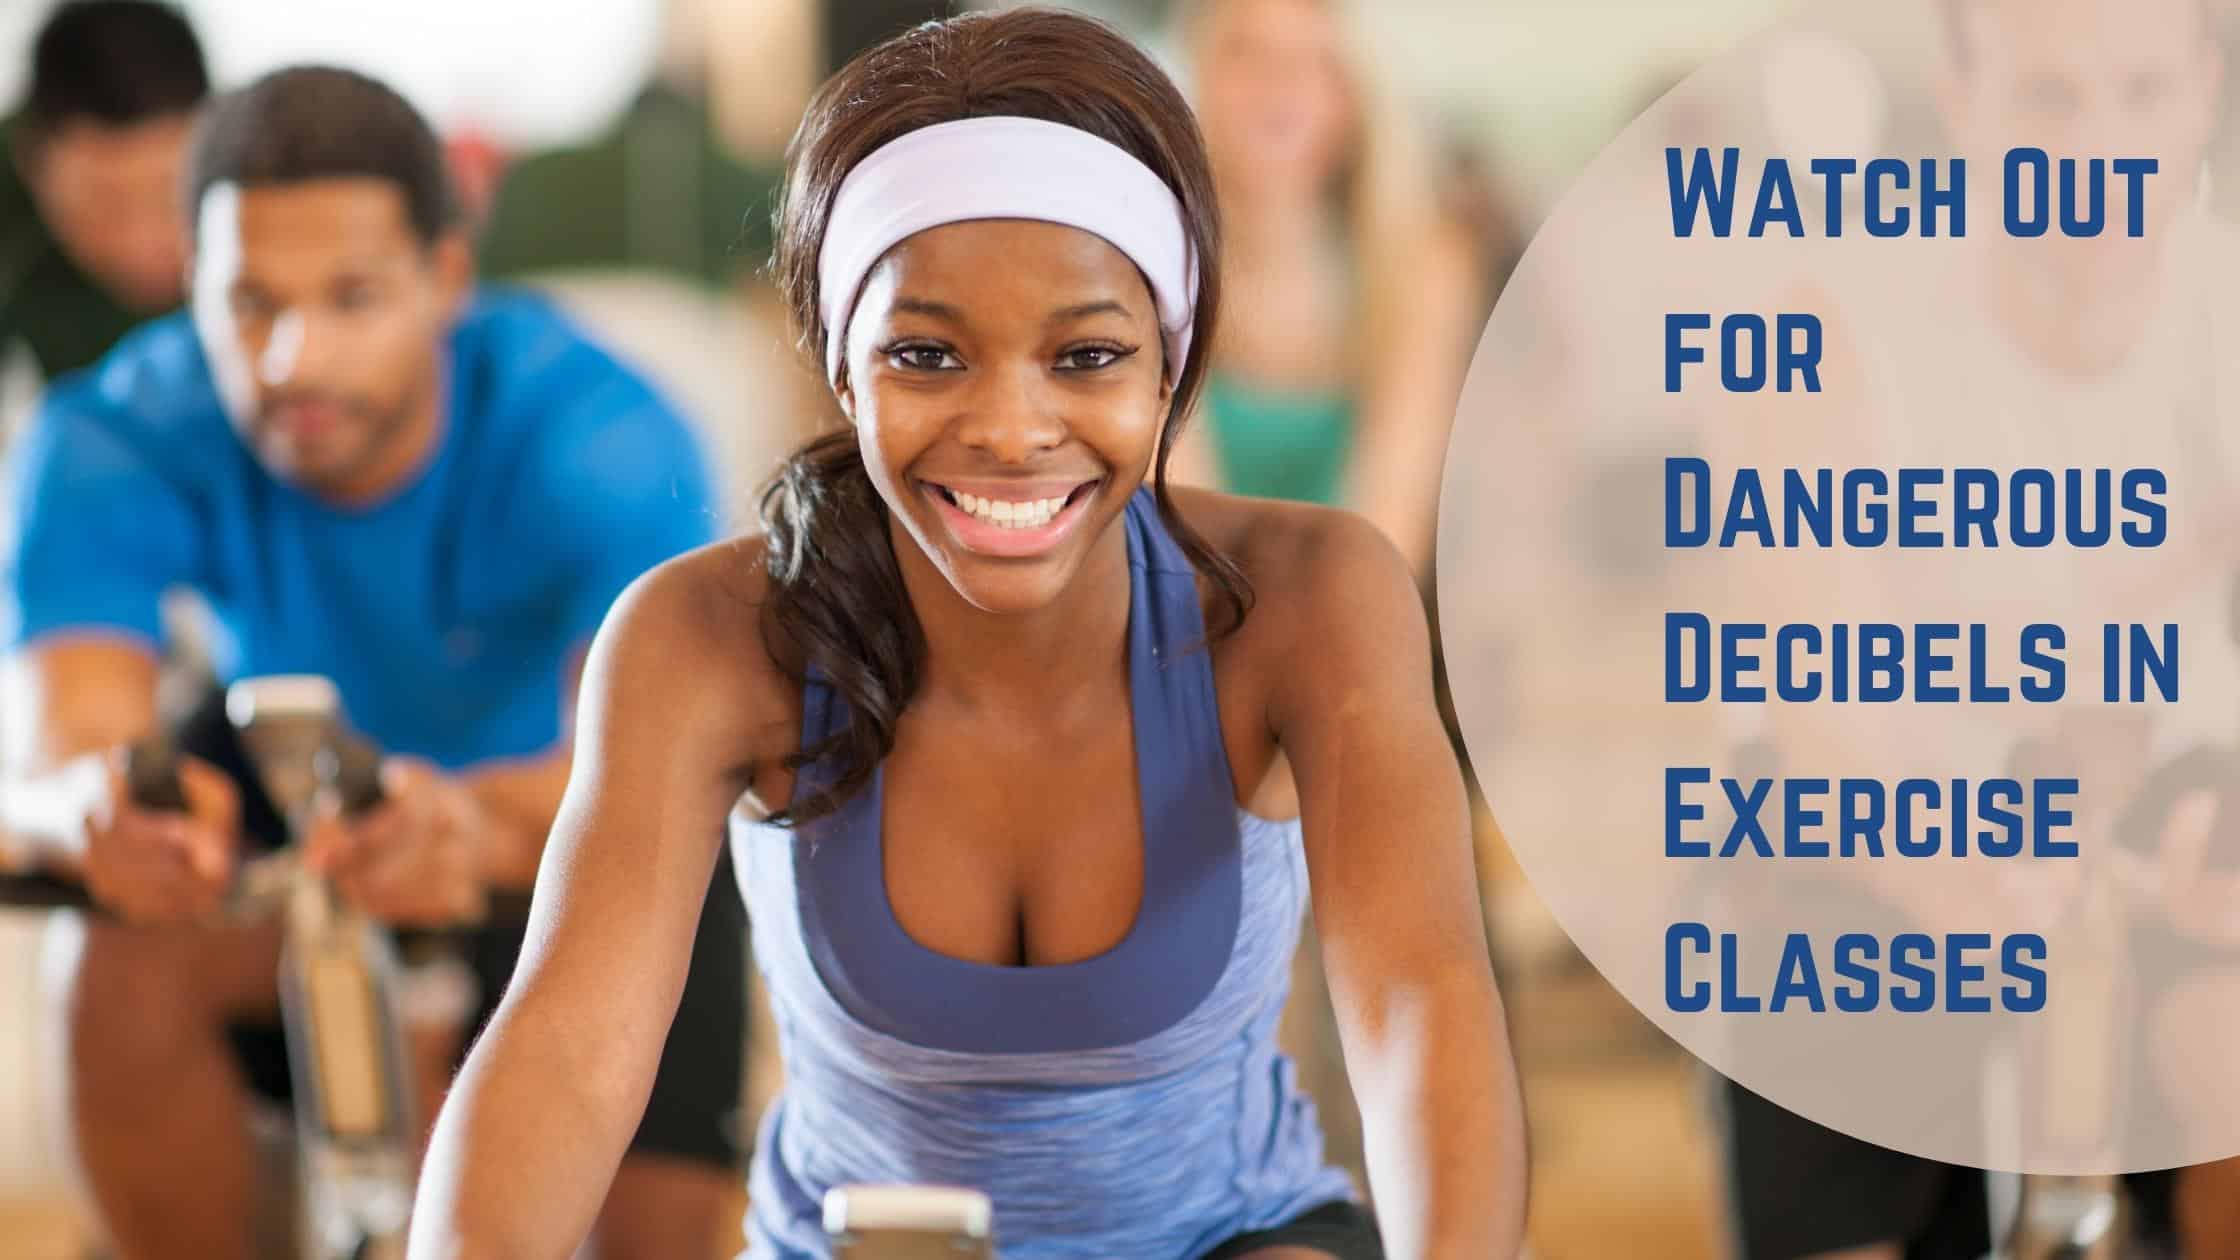 Watch Out for Dangerous Decibels in Exercise Classes